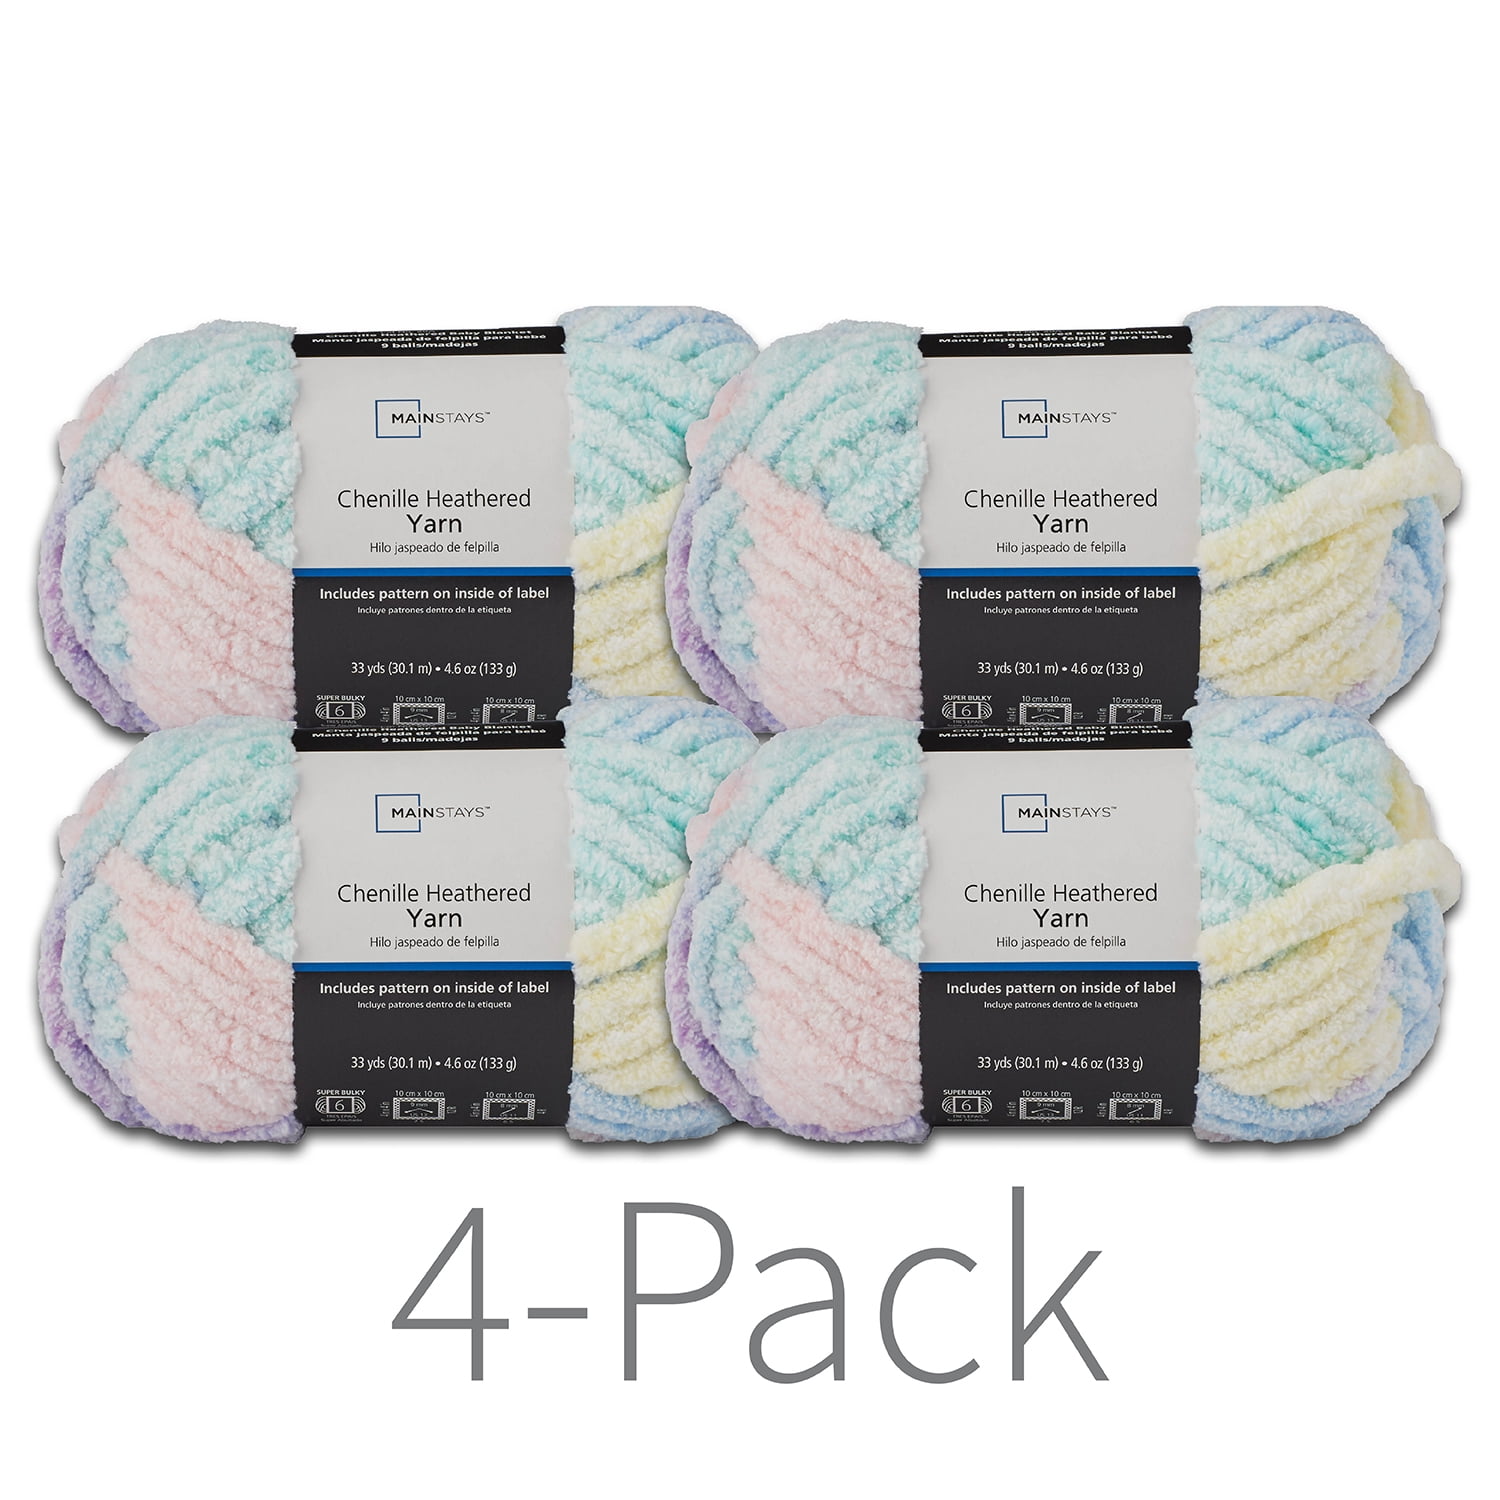 Yarn Review - Walmart has Different Mainstay Yarn - Will it be